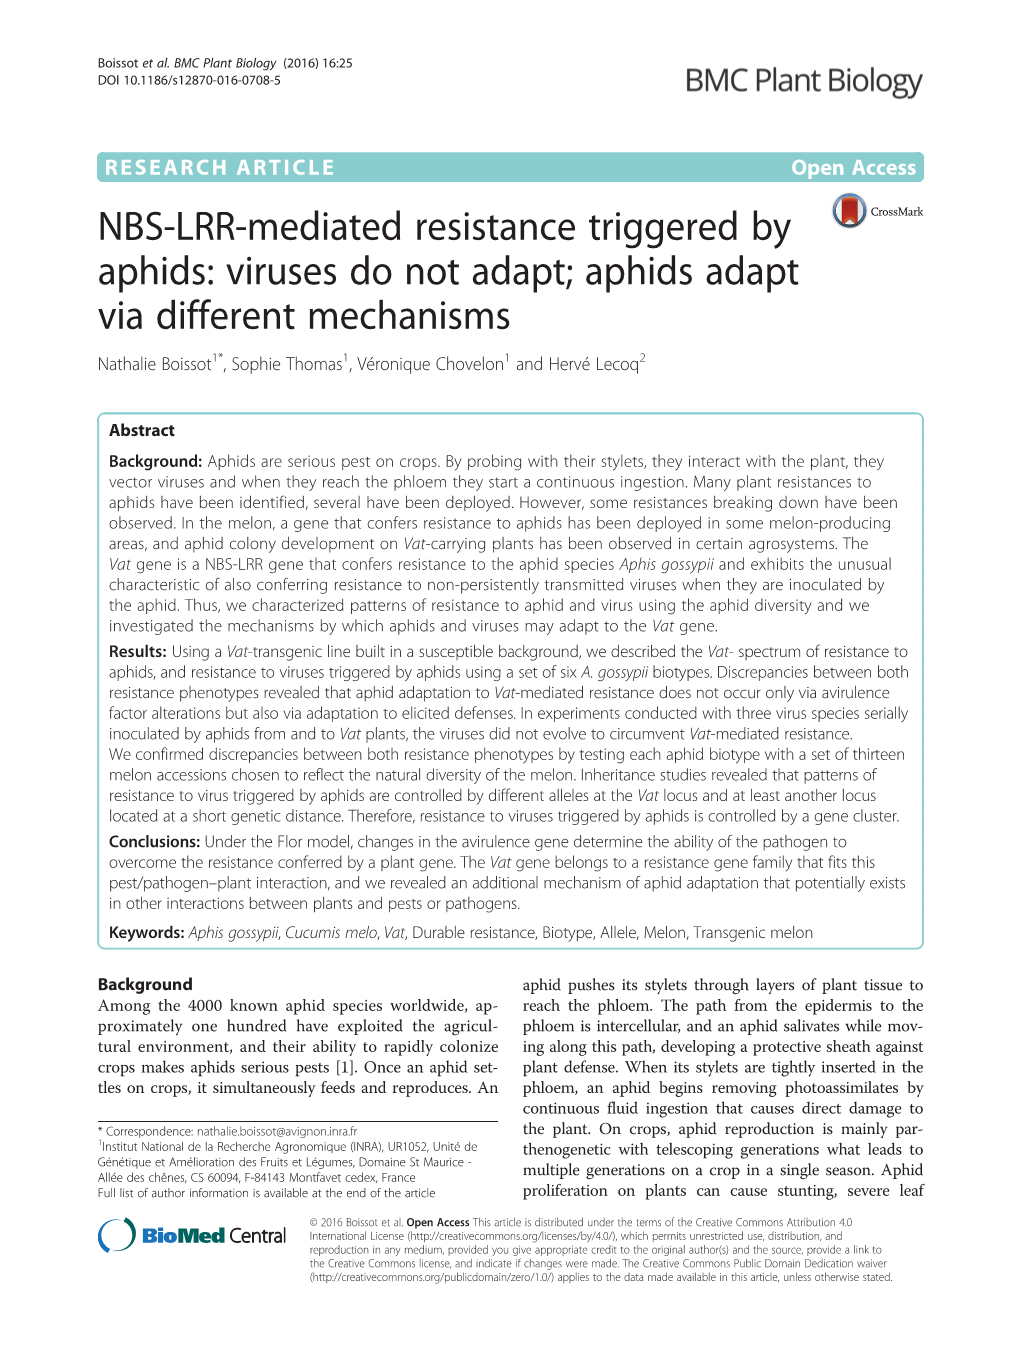 NBS-LRR-Mediated Resistance Triggered By